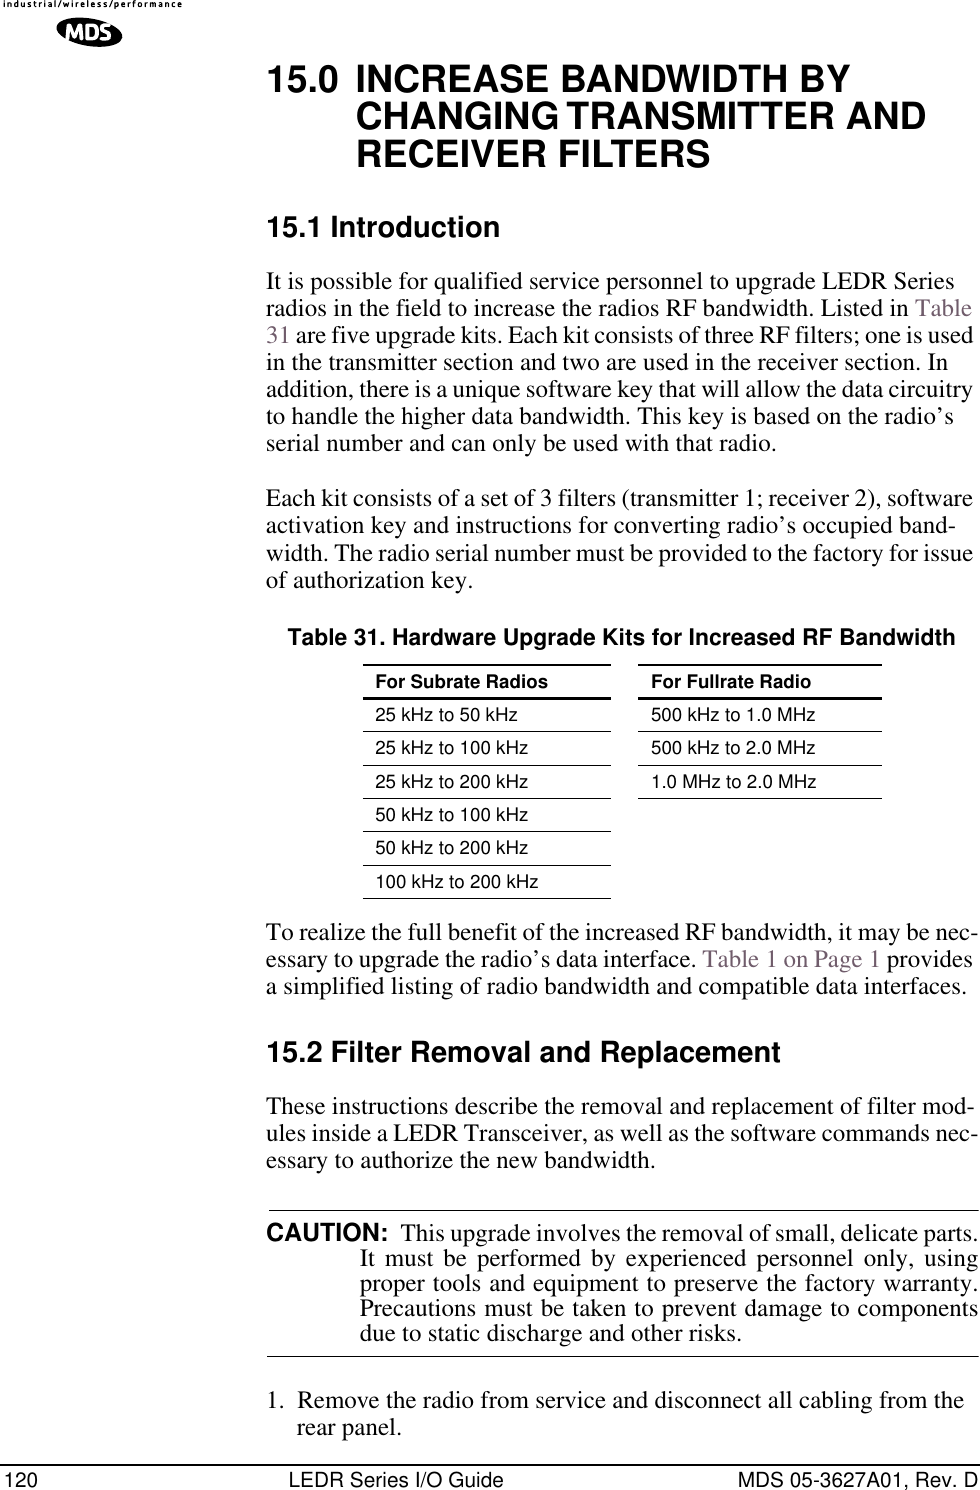 120 LEDR Series I/O Guide MDS 05-3627A01, Rev. D15.0 INCREASE BANDWIDTH BY CHANGING TRANSMITTER AND RECEIVER FILTERS15.1 IntroductionIt is possible for qualified service personnel to upgrade LEDR Series radios in the field to increase the radios RF bandwidth. Listed in Table 31 are five upgrade kits. Each kit consists of three RF filters; one is used in the transmitter section and two are used in the receiver section. In addition, there is a unique software key that will allow the data circuitry to handle the higher data bandwidth. This key is based on the radio’s serial number and can only be used with that radio.Each kit consists of a set of 3 filters (transmitter 1; receiver 2), software activation key and instructions for converting radio’s occupied band-width. The radio serial number must be provided to the factory for issue of authorization key.To realize the full benefit of the increased RF bandwidth, it may be nec-essary to upgrade the radio’s data interface. Table 1 on Page 1 provides a simplified listing of radio bandwidth and compatible data interfaces.15.2 Filter Removal and ReplacementThese instructions describe the removal and replacement of filter mod-ules inside a LEDR Transceiver, as well as the software commands nec-essary to authorize the new bandwidth.CAUTION:  This upgrade involves the removal of small, delicate parts.It must be performed by experienced personnel only, usingproper tools and equipment to preserve the factory warranty.Precautions must be taken to prevent damage to componentsdue to static discharge and other risks.1. Remove the radio from service and disconnect all cabling from the rear panel.Table 31. Hardware Upgrade Kits for Increased RF BandwidthFor Subrate Radios For Fullrate Radio25 kHz to 50 kHz 500 kHz to 1.0 MHz25 kHz to 100 kHz 500 kHz to 2.0 MHz25 kHz to 200 kHz 1.0 MHz to 2.0 MHz50 kHz to 100 kHz50 kHz to 200 kHz100 kHz to 200 kHz